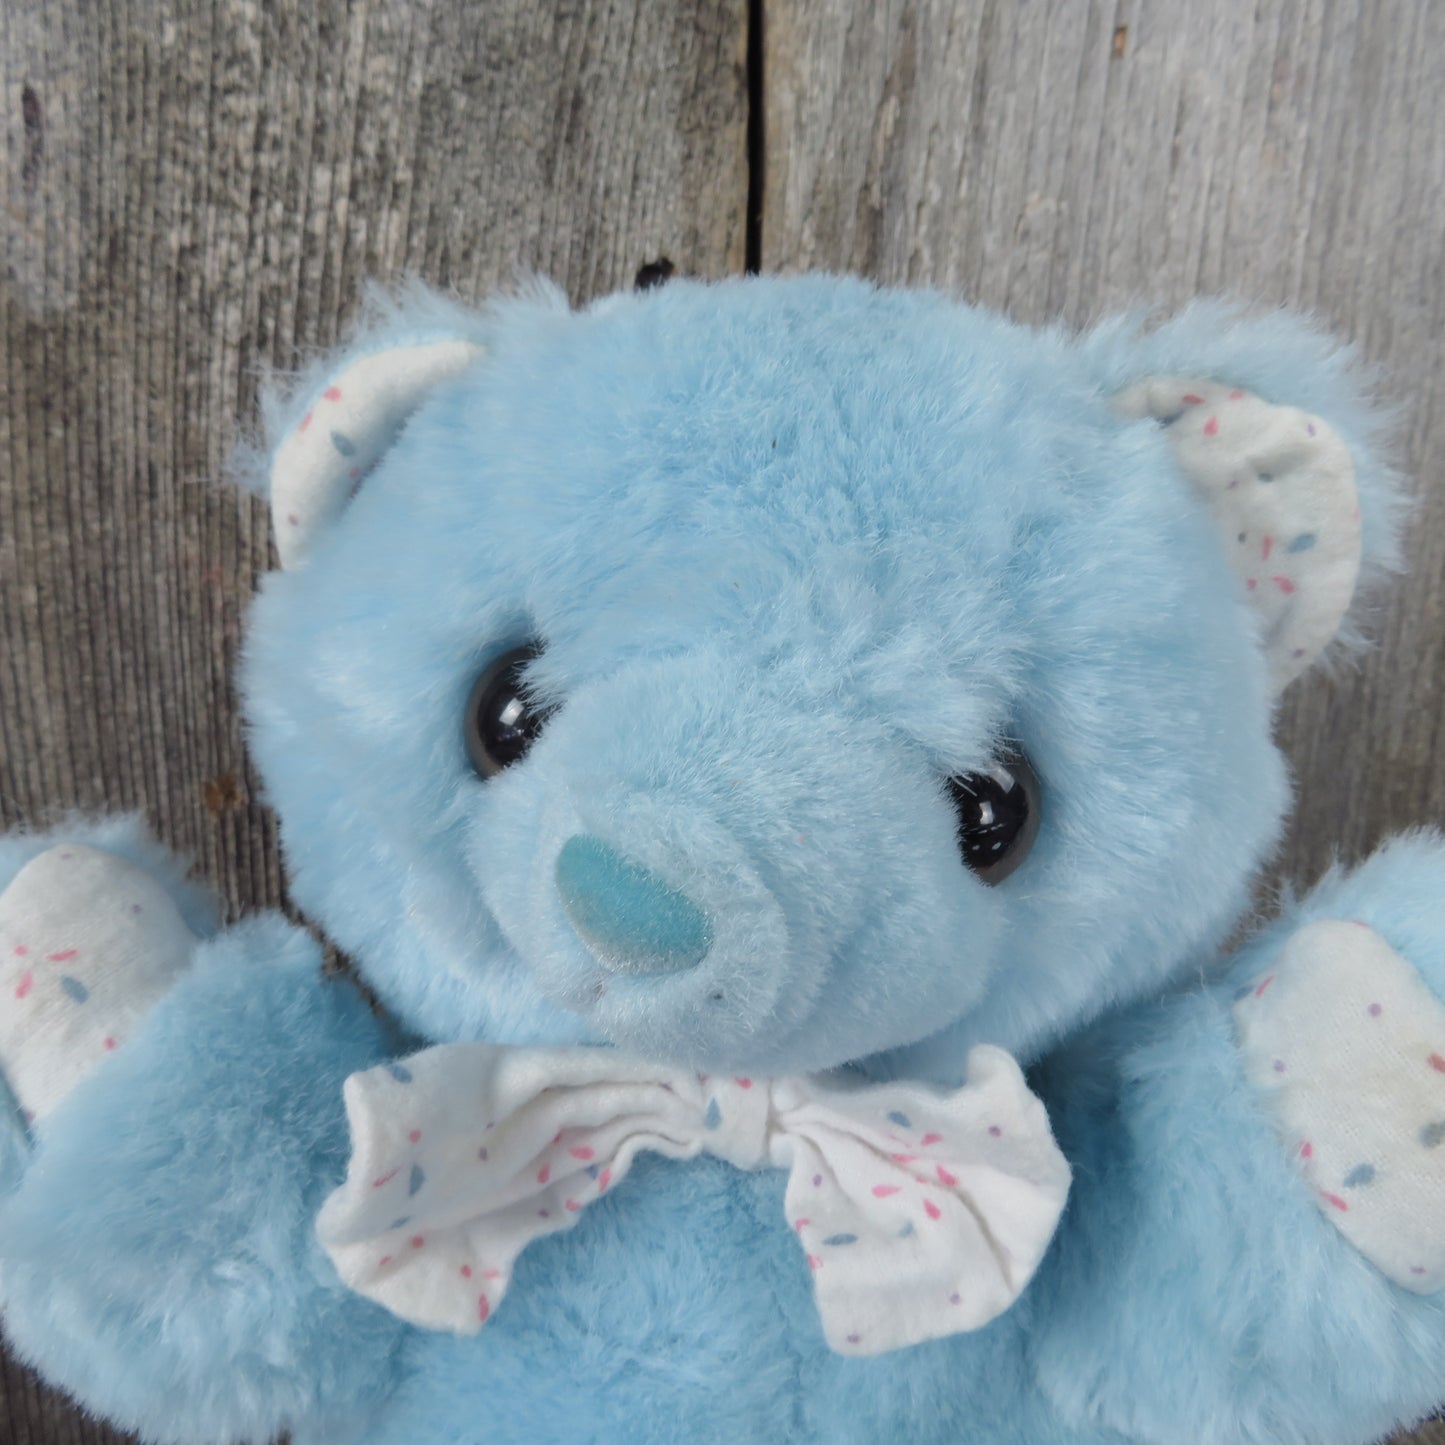 Vintage Blue Teddy Bear Plush Stuffed Animal Flocked Nose White Flannel Bow Tie and Paws Cuddle Wit - At Grandma's Table